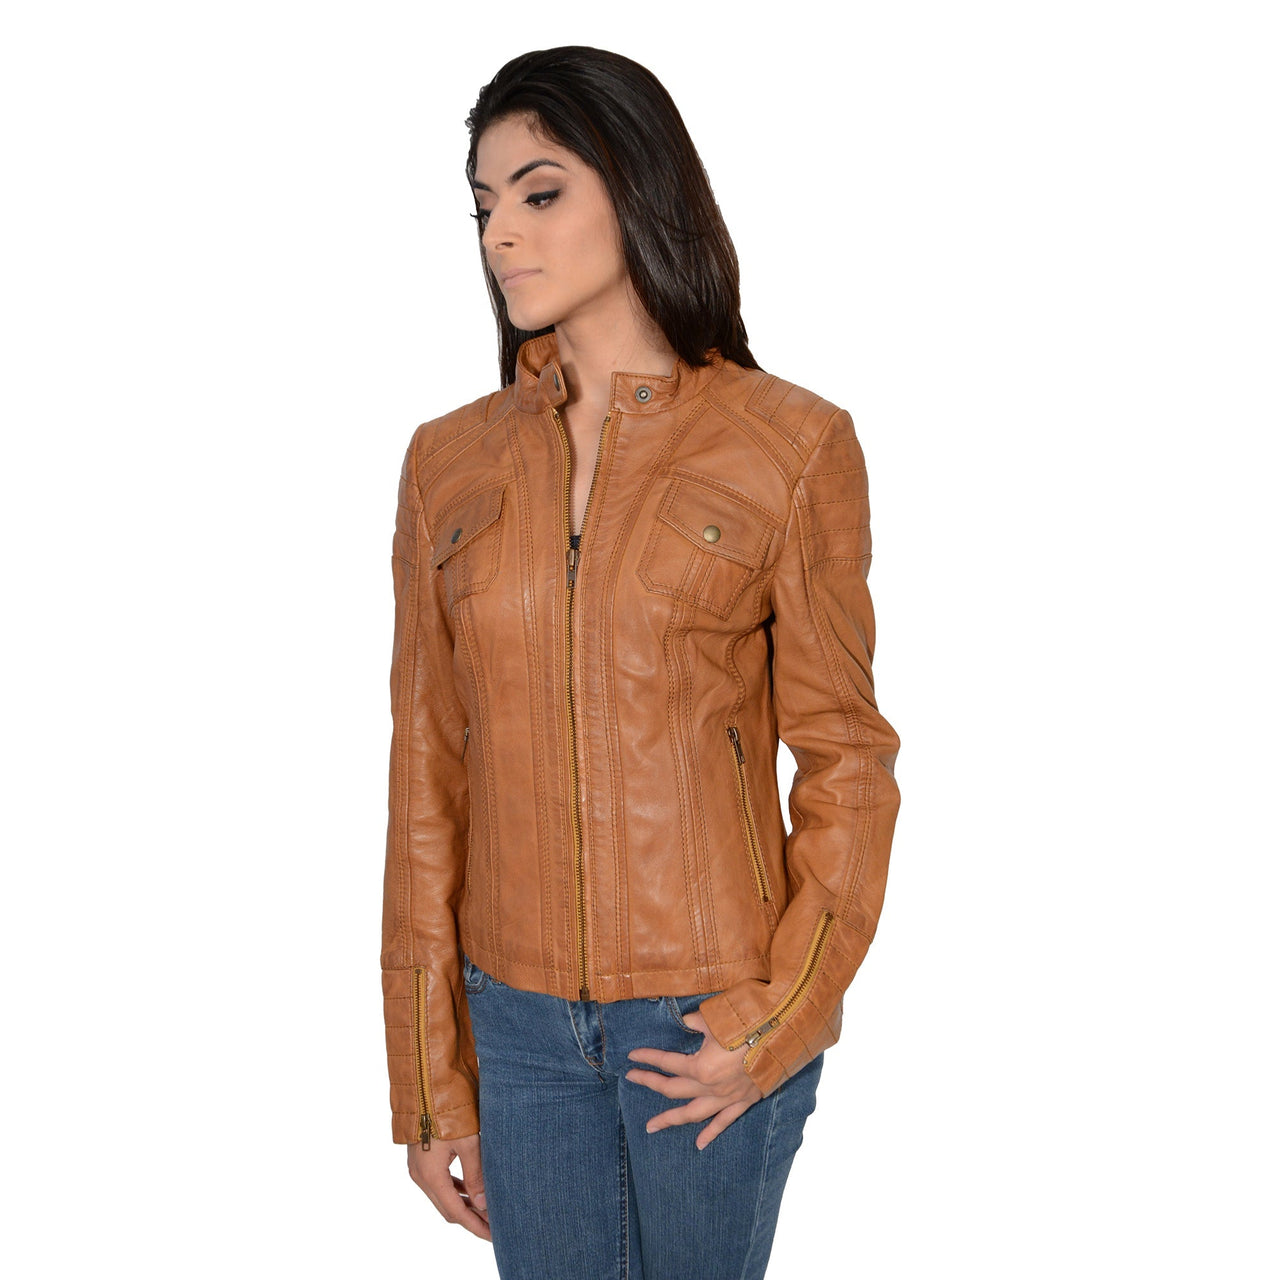 Ladies mandarin scuba collar jacket with quilted shoulders and cuff. - HighwayLeather